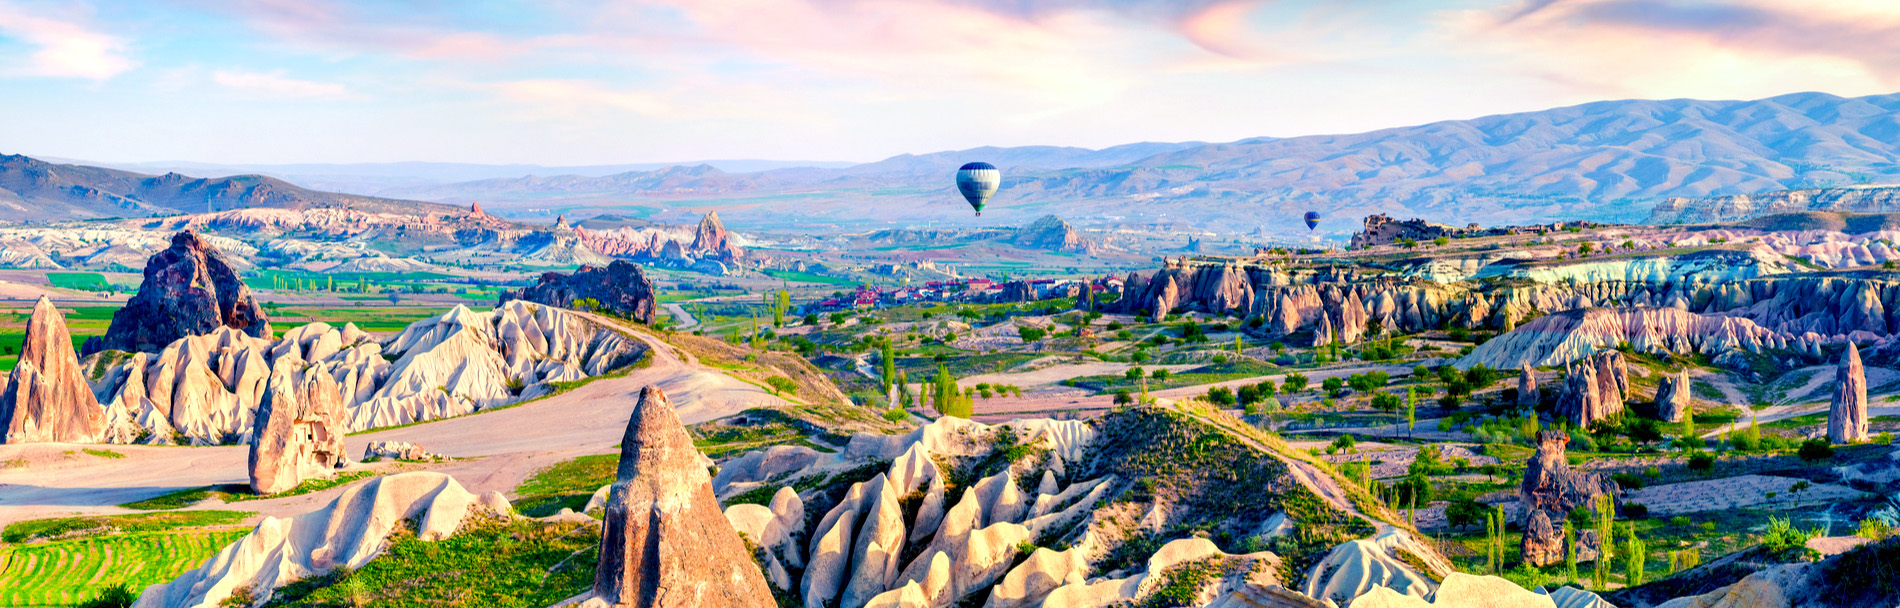 Istanbul & Cappadocia Tour Package - 5 Nights